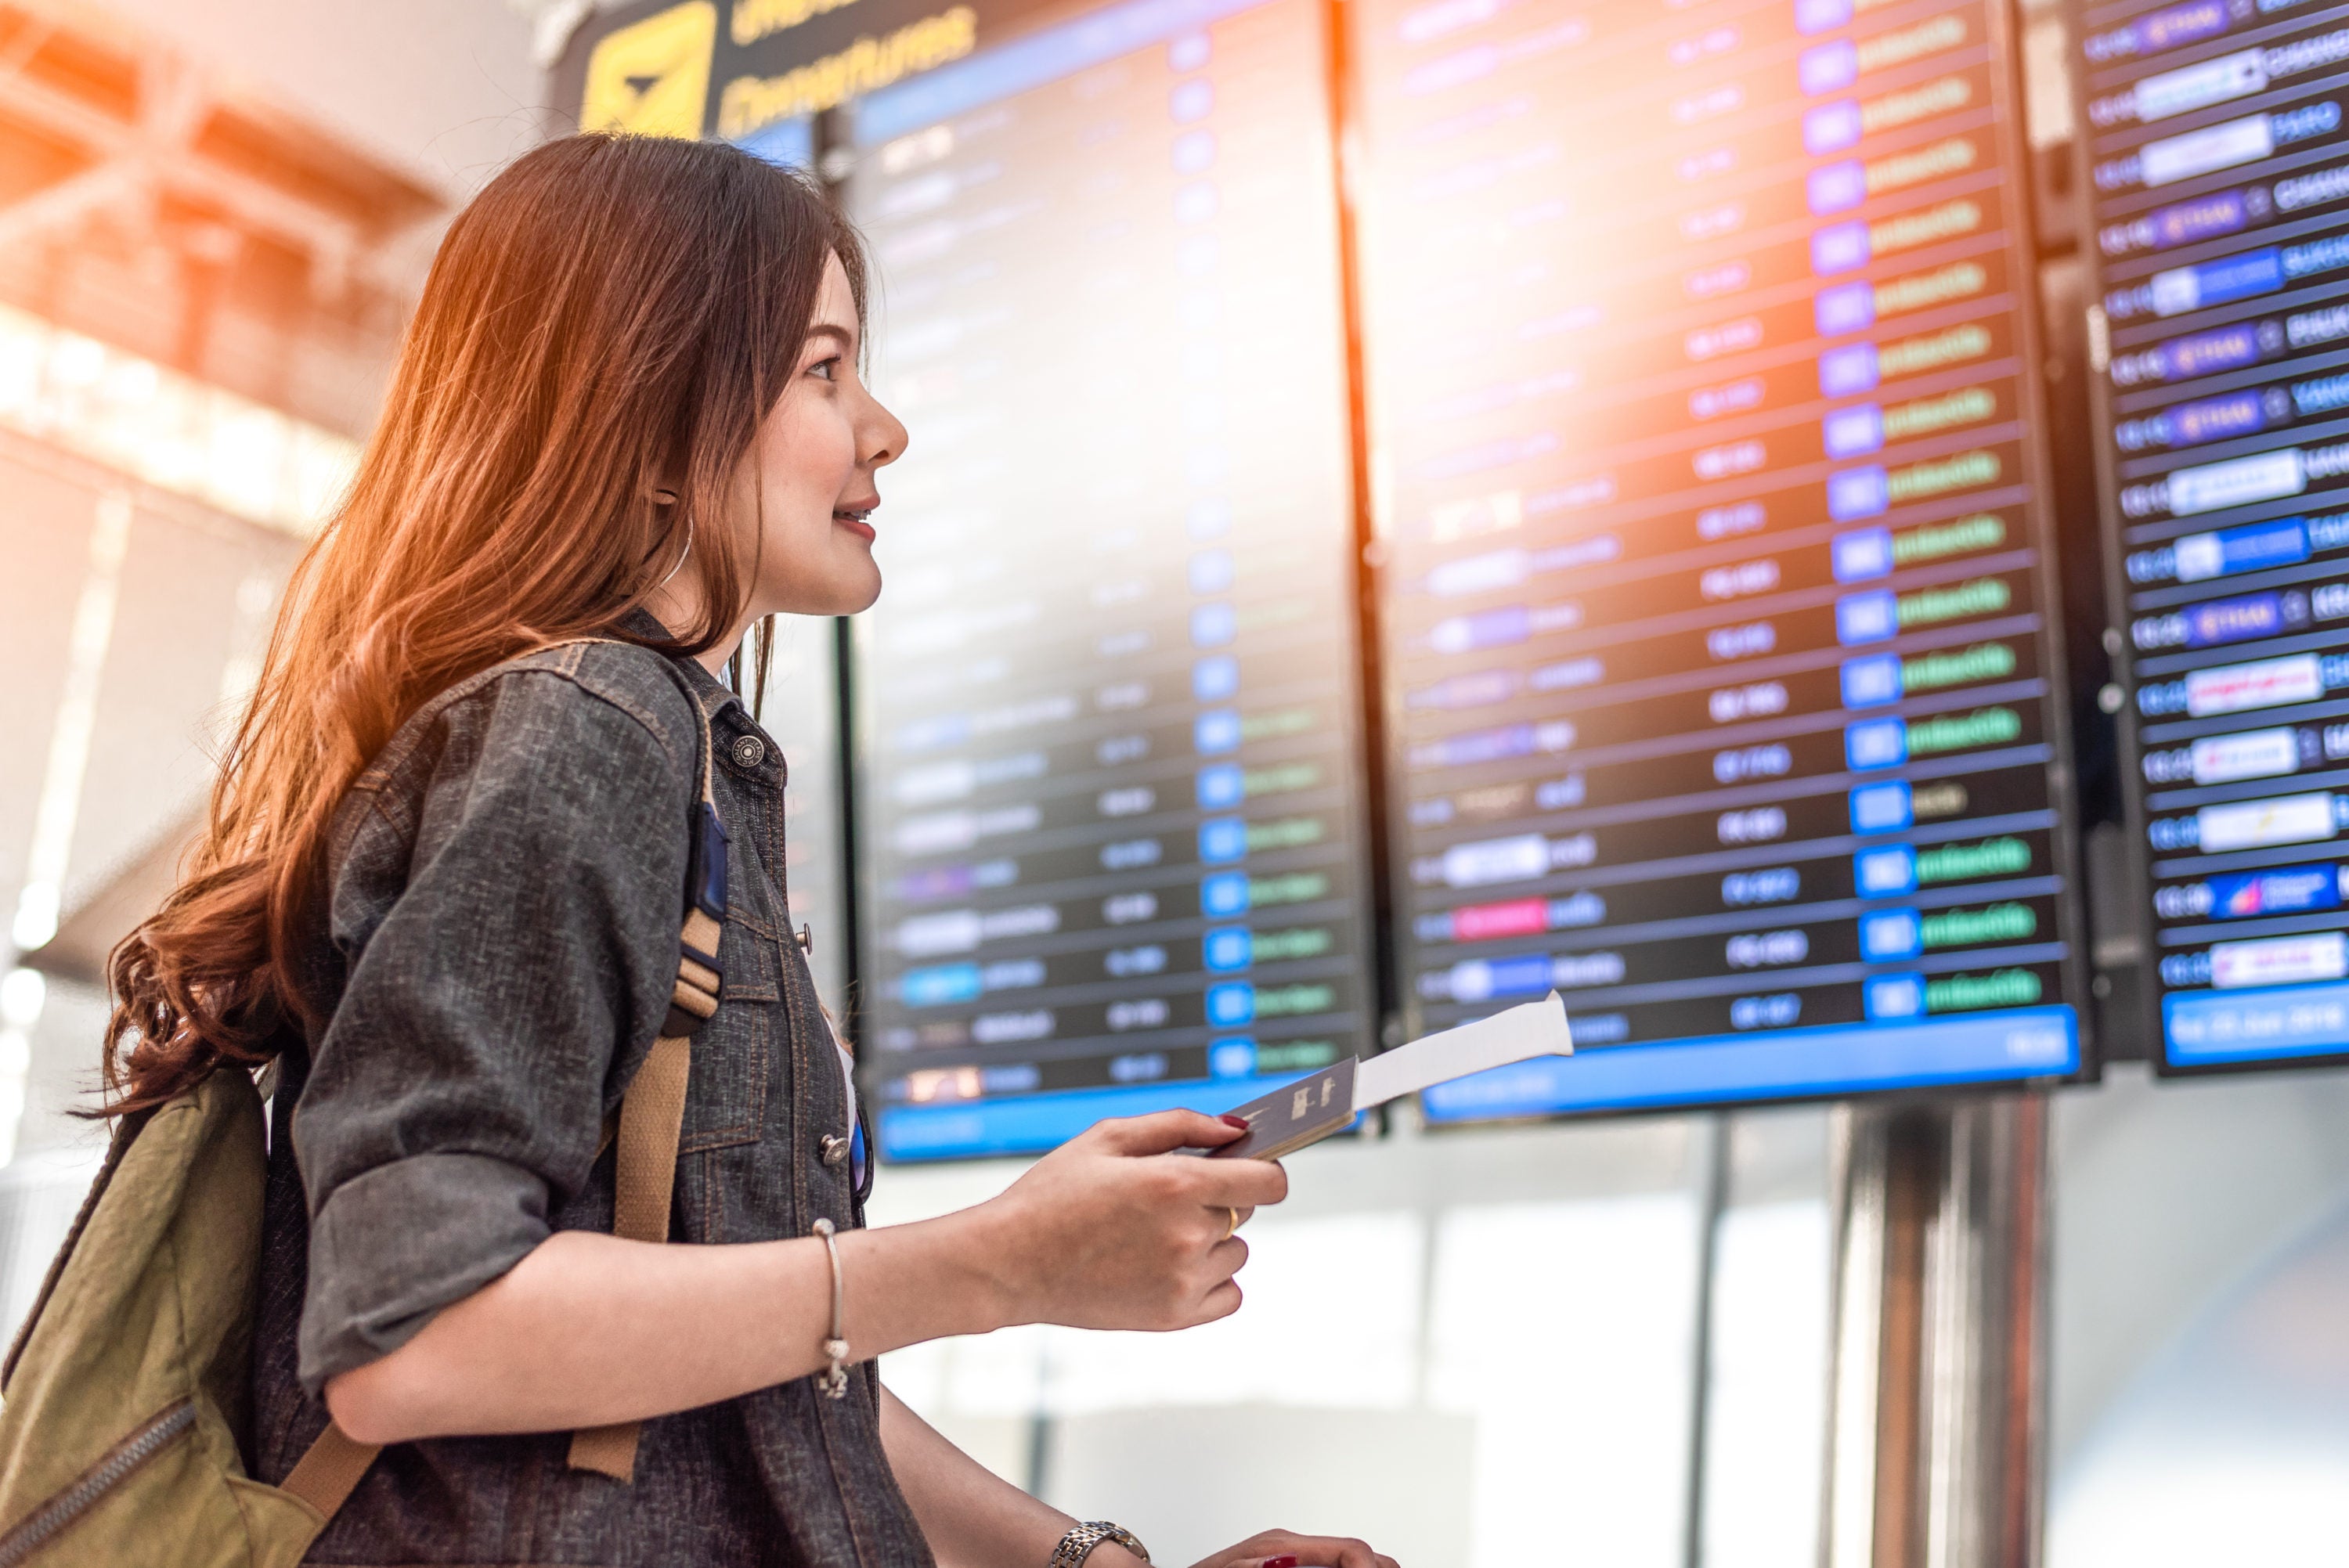 Female traveler looking at airline departure board at airport with passport